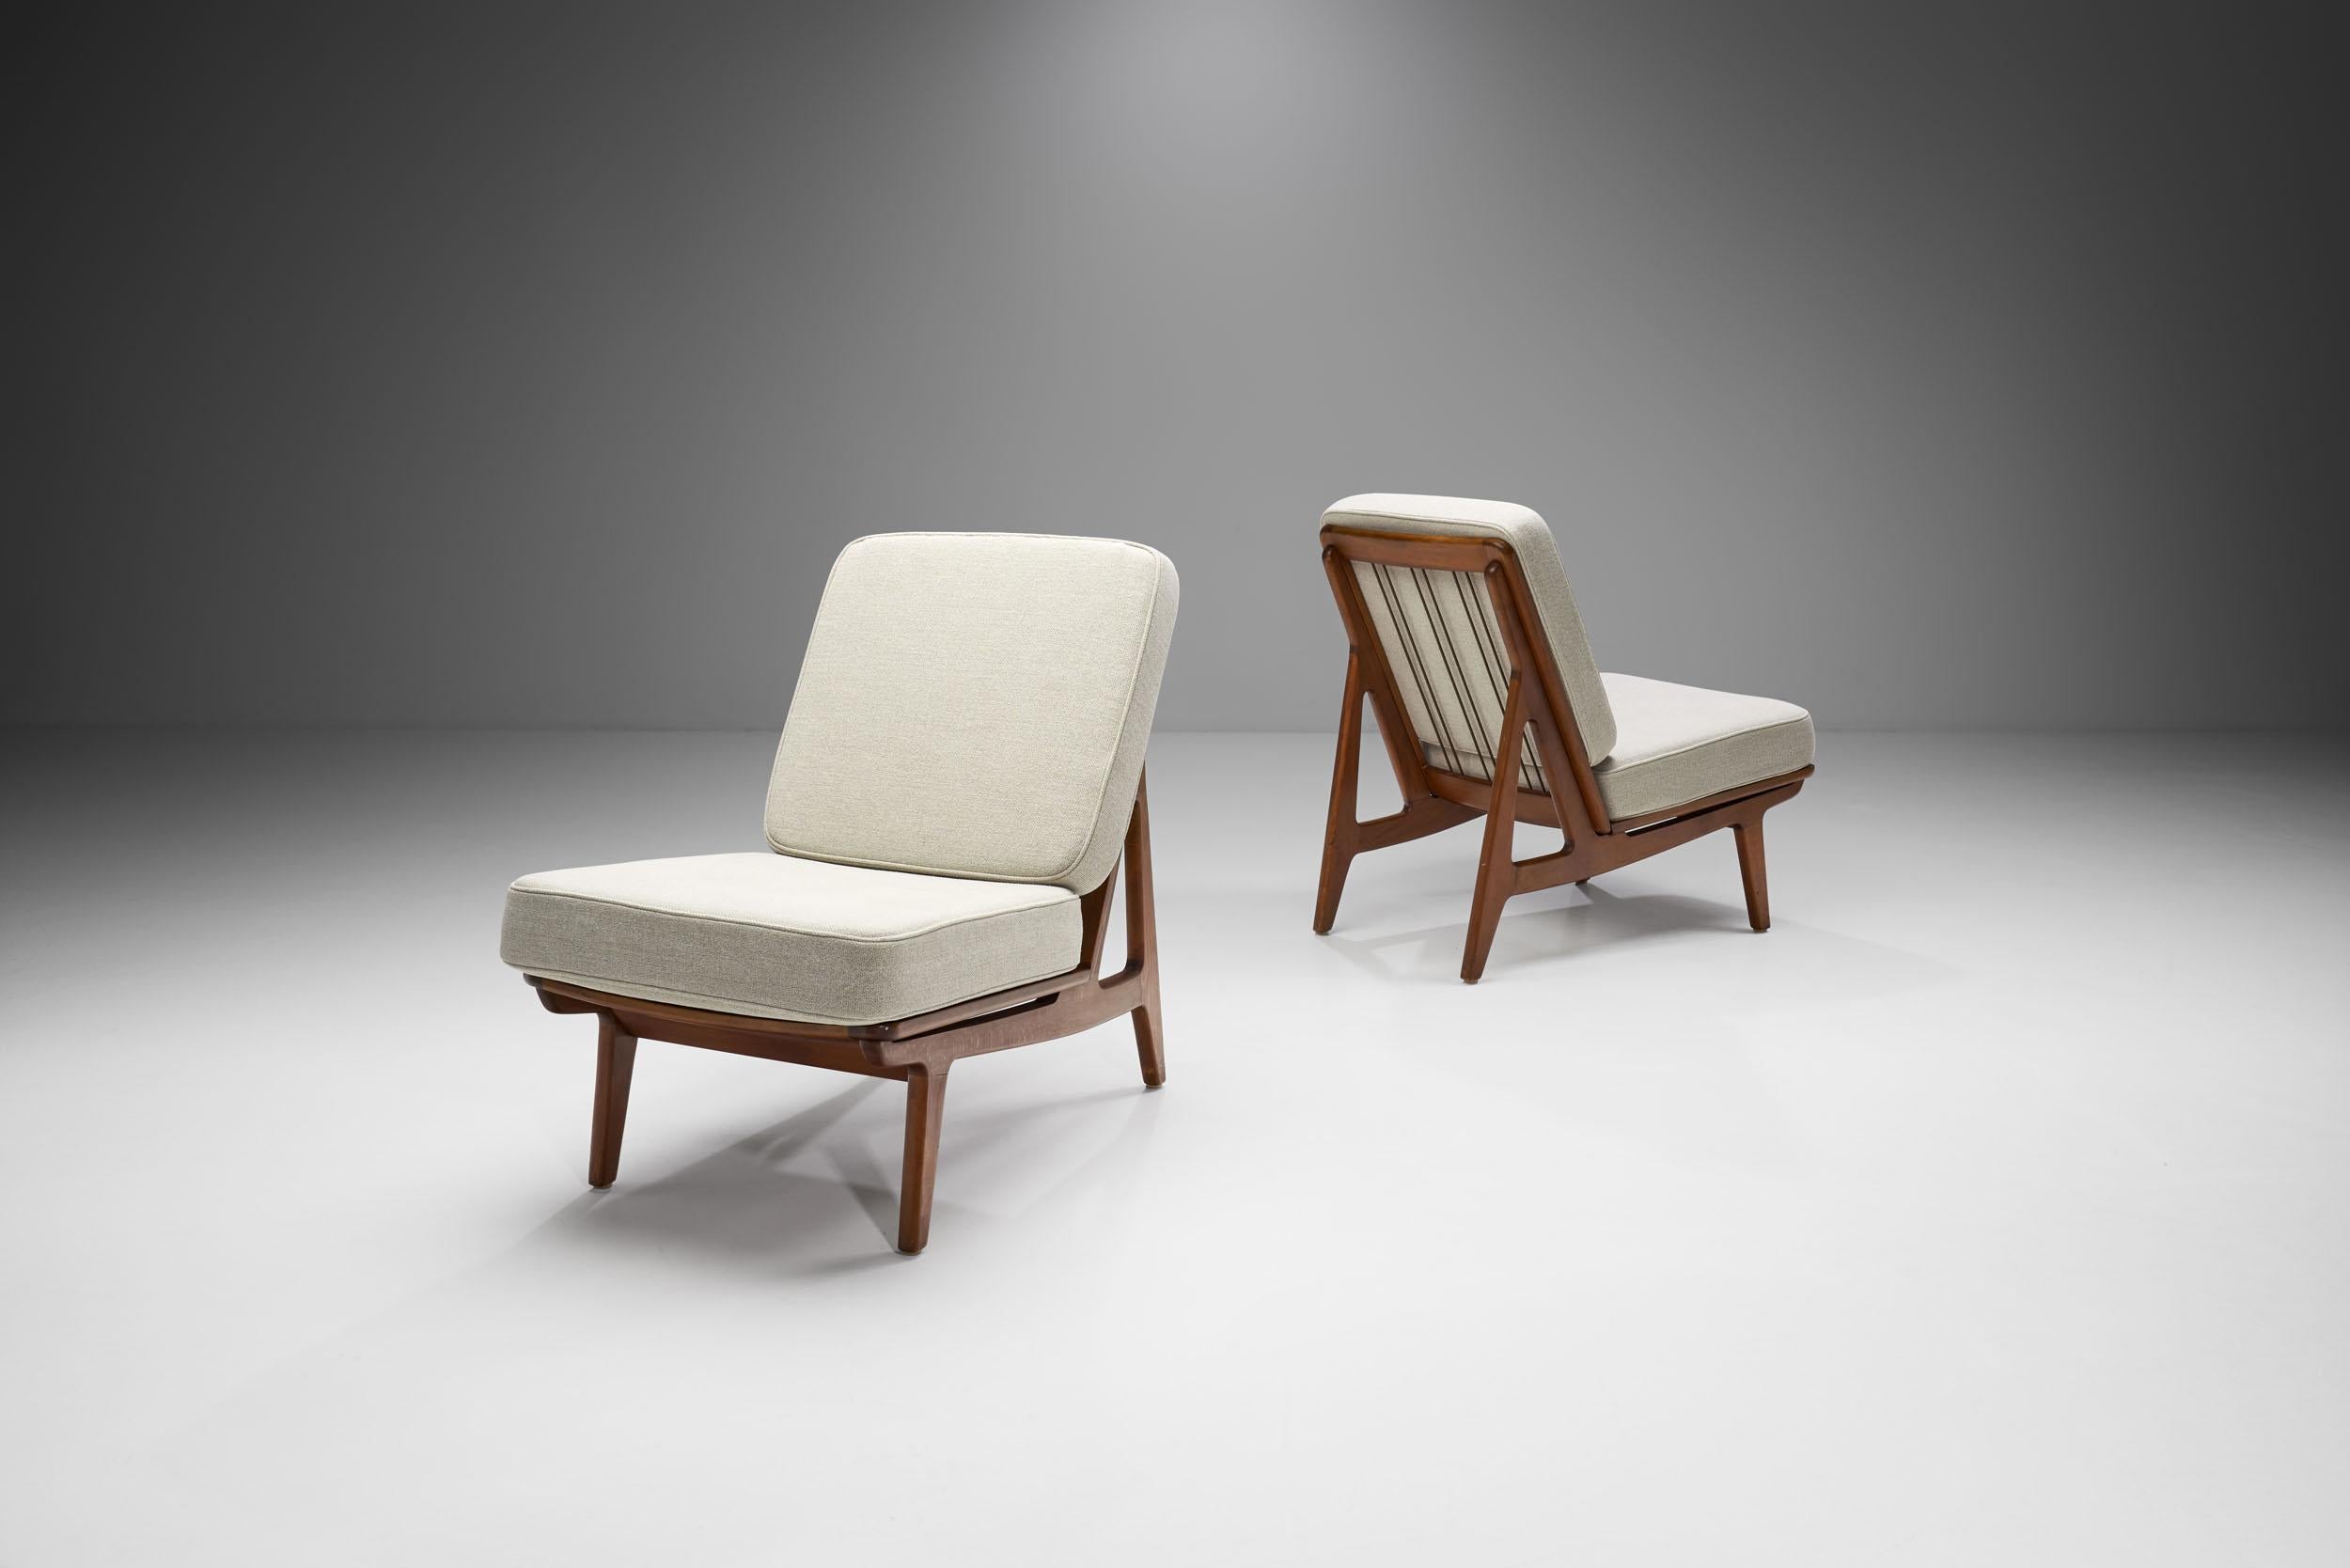 This pair of beech “FD172” easy chairs was designed by the Danish designer duo, Peter Hvidt and Orla Mølgaard-Nielsen for the manufacturer France & Daverkosen in the 1950s.

This beautiful pair of slipper chairs feature a modest and elegant